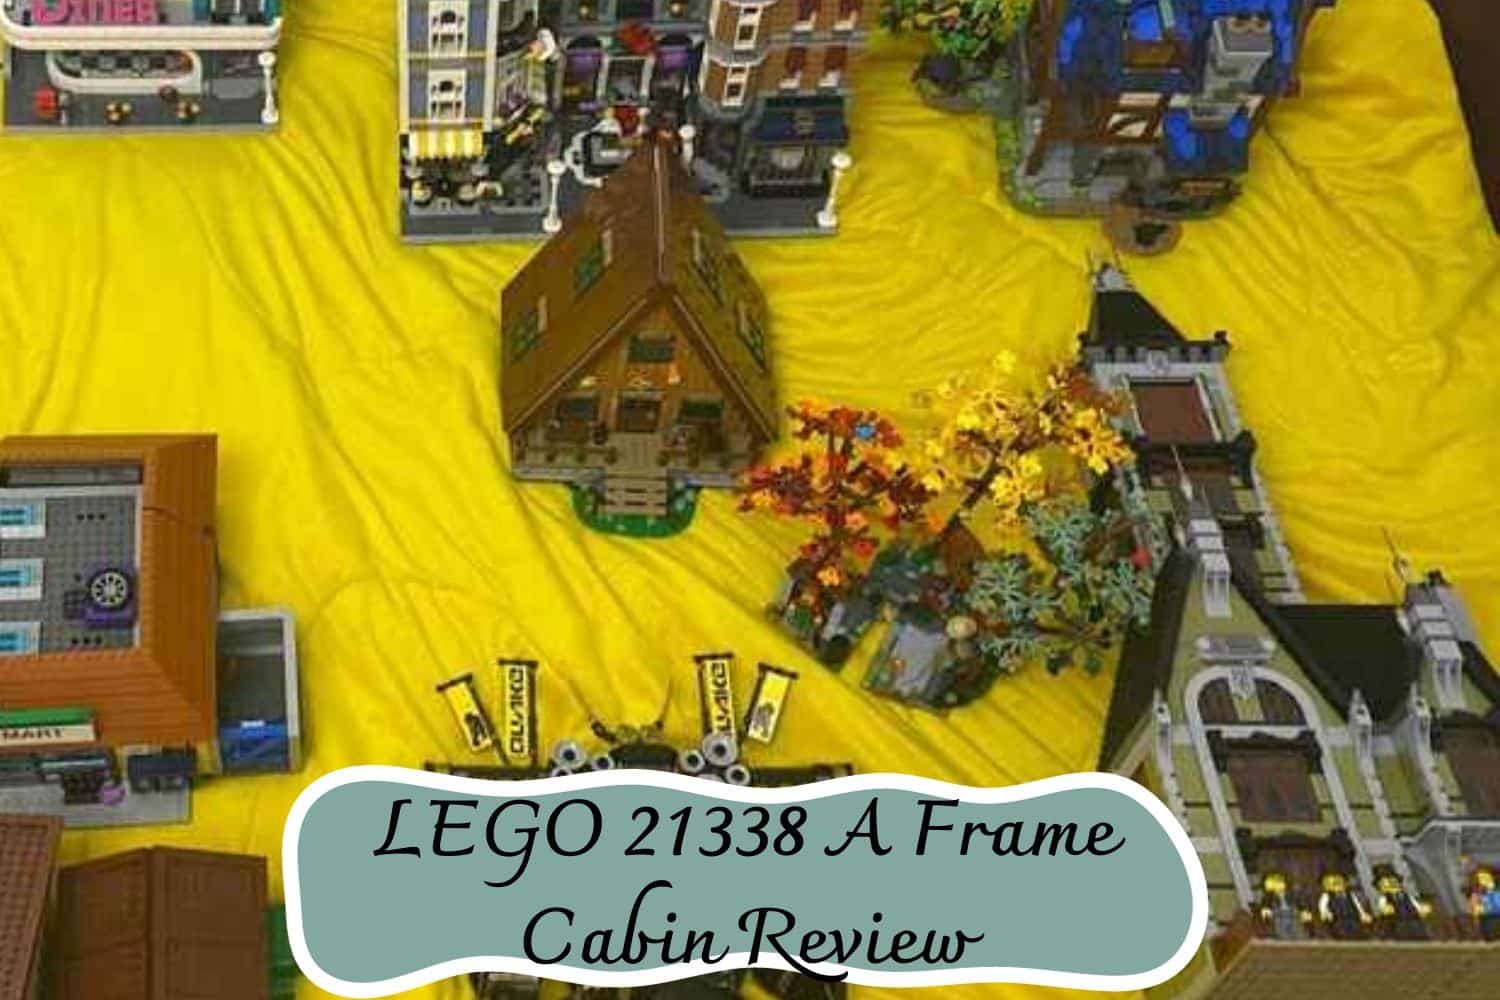 LEGO 21338 A Frame Cabin Review